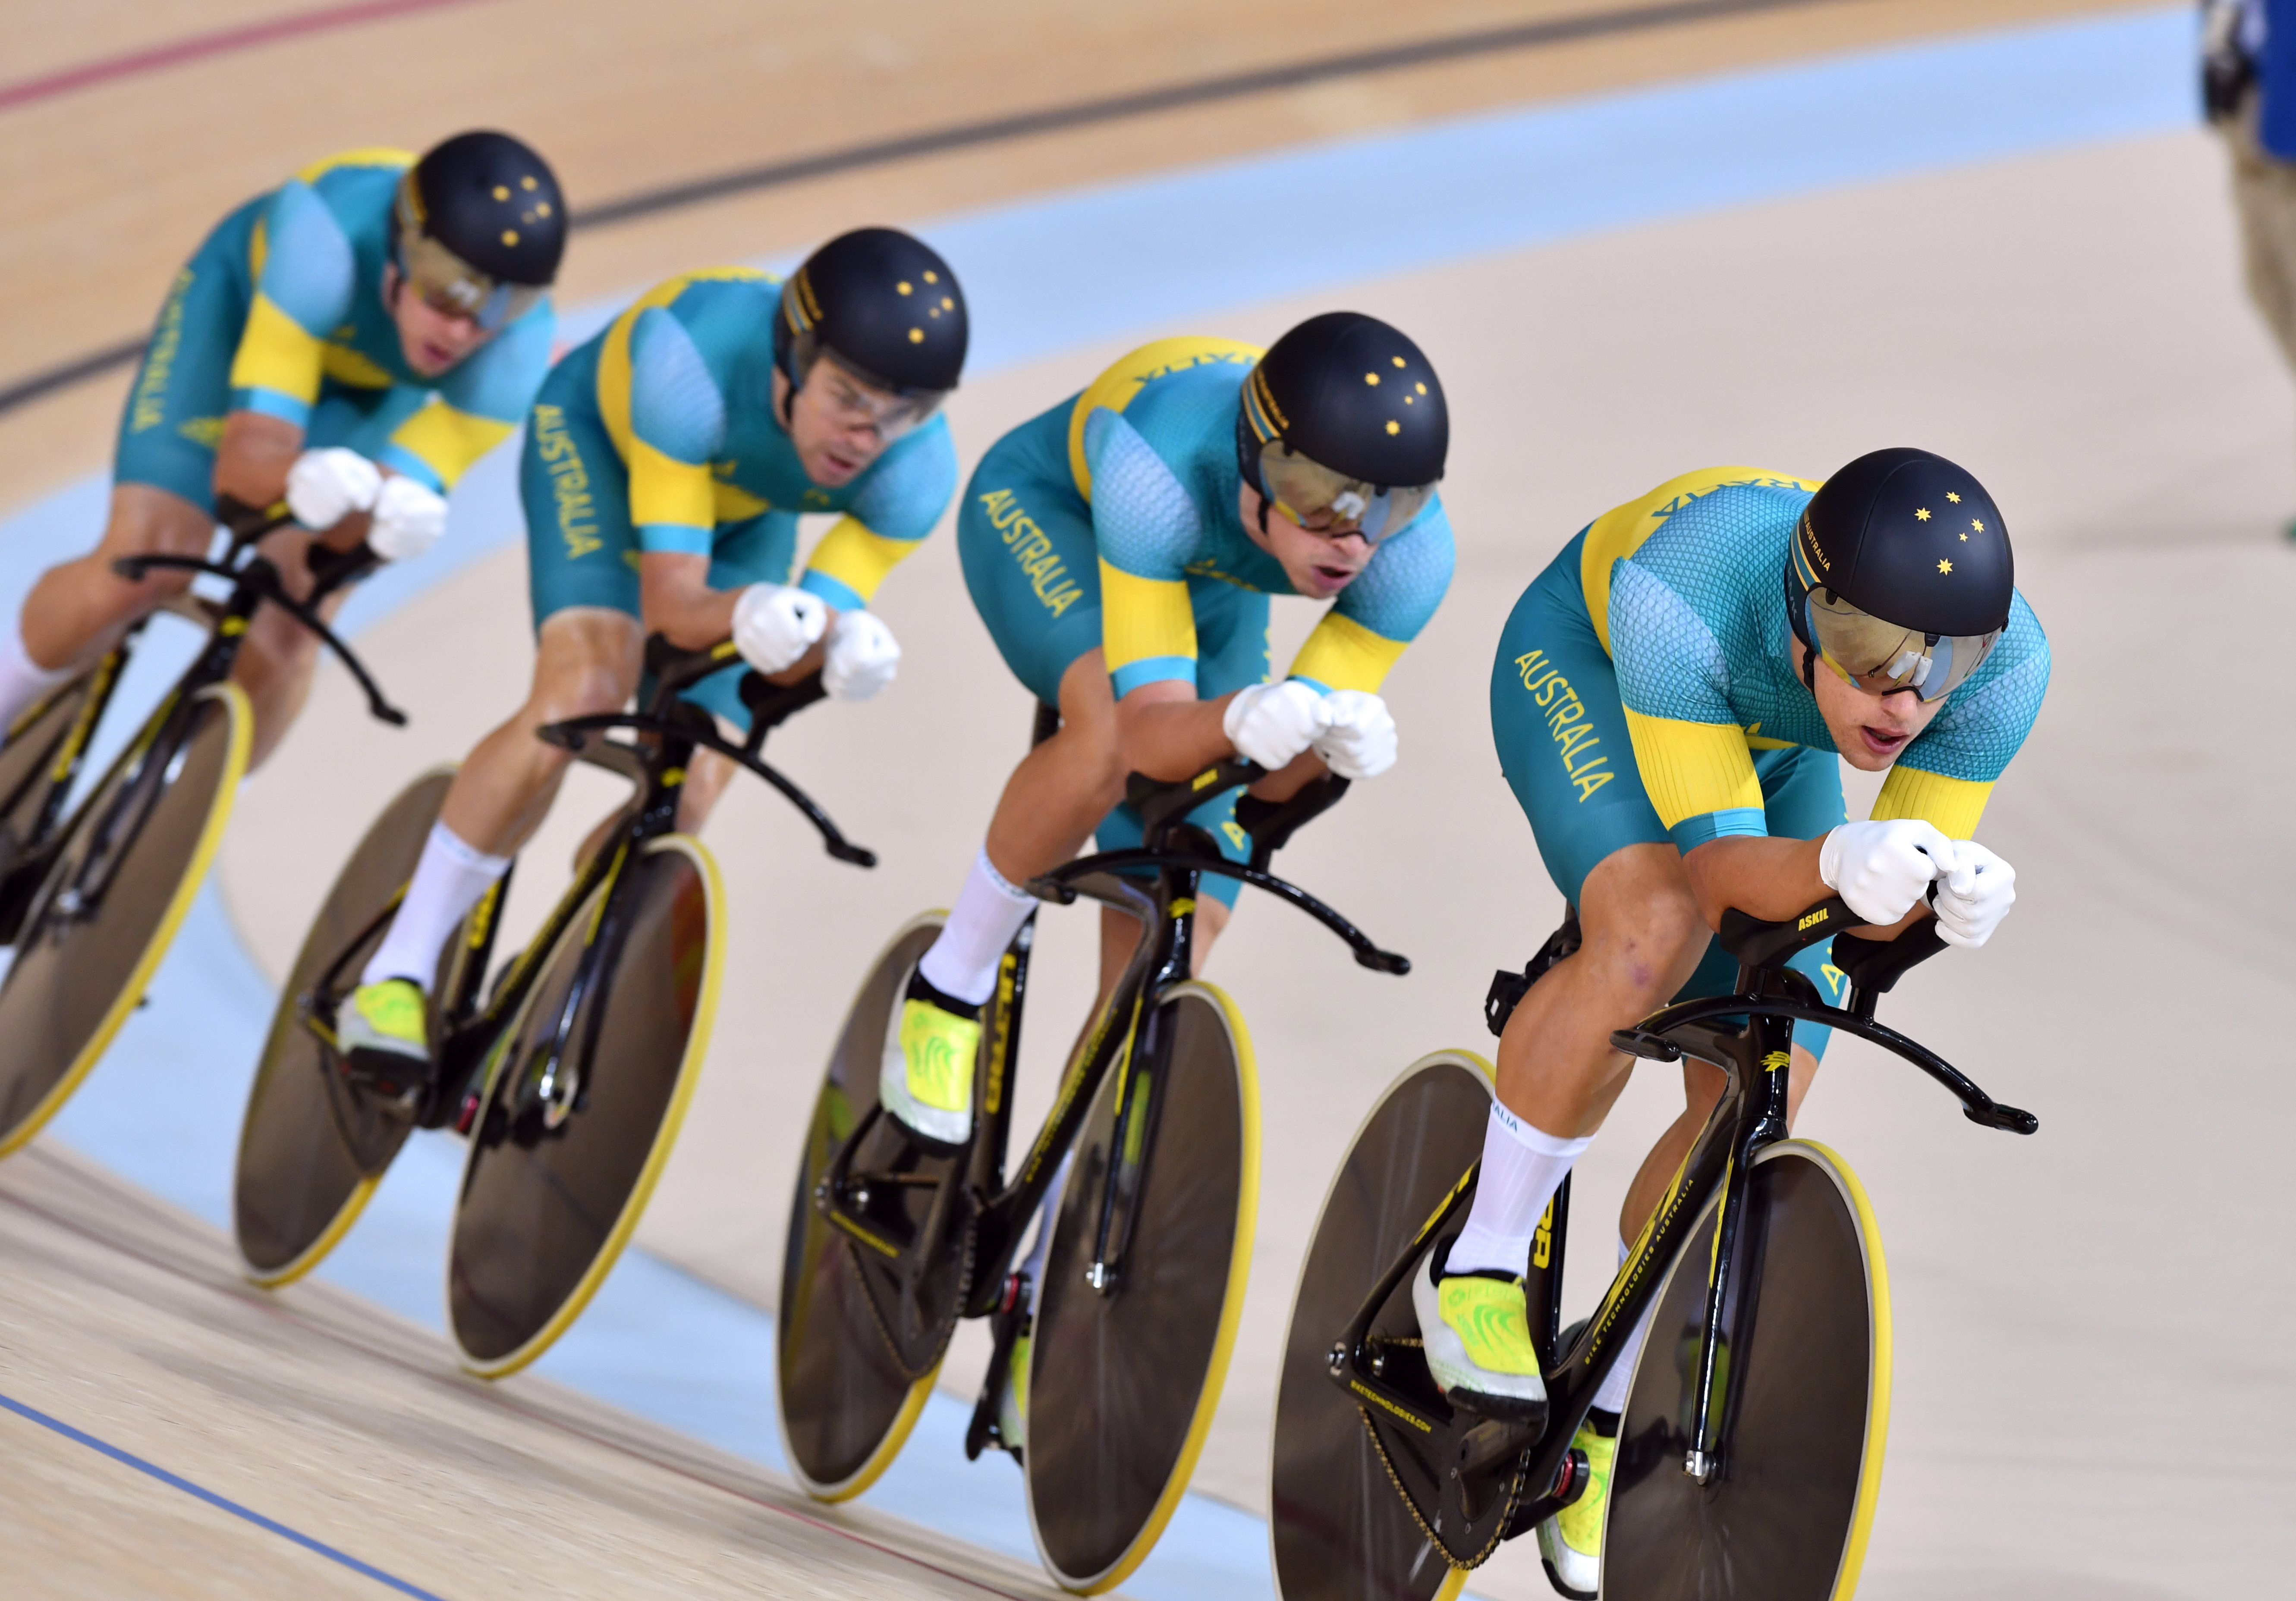 Olympic Speed System – Adelaide a center of cycling manufacturing excellence